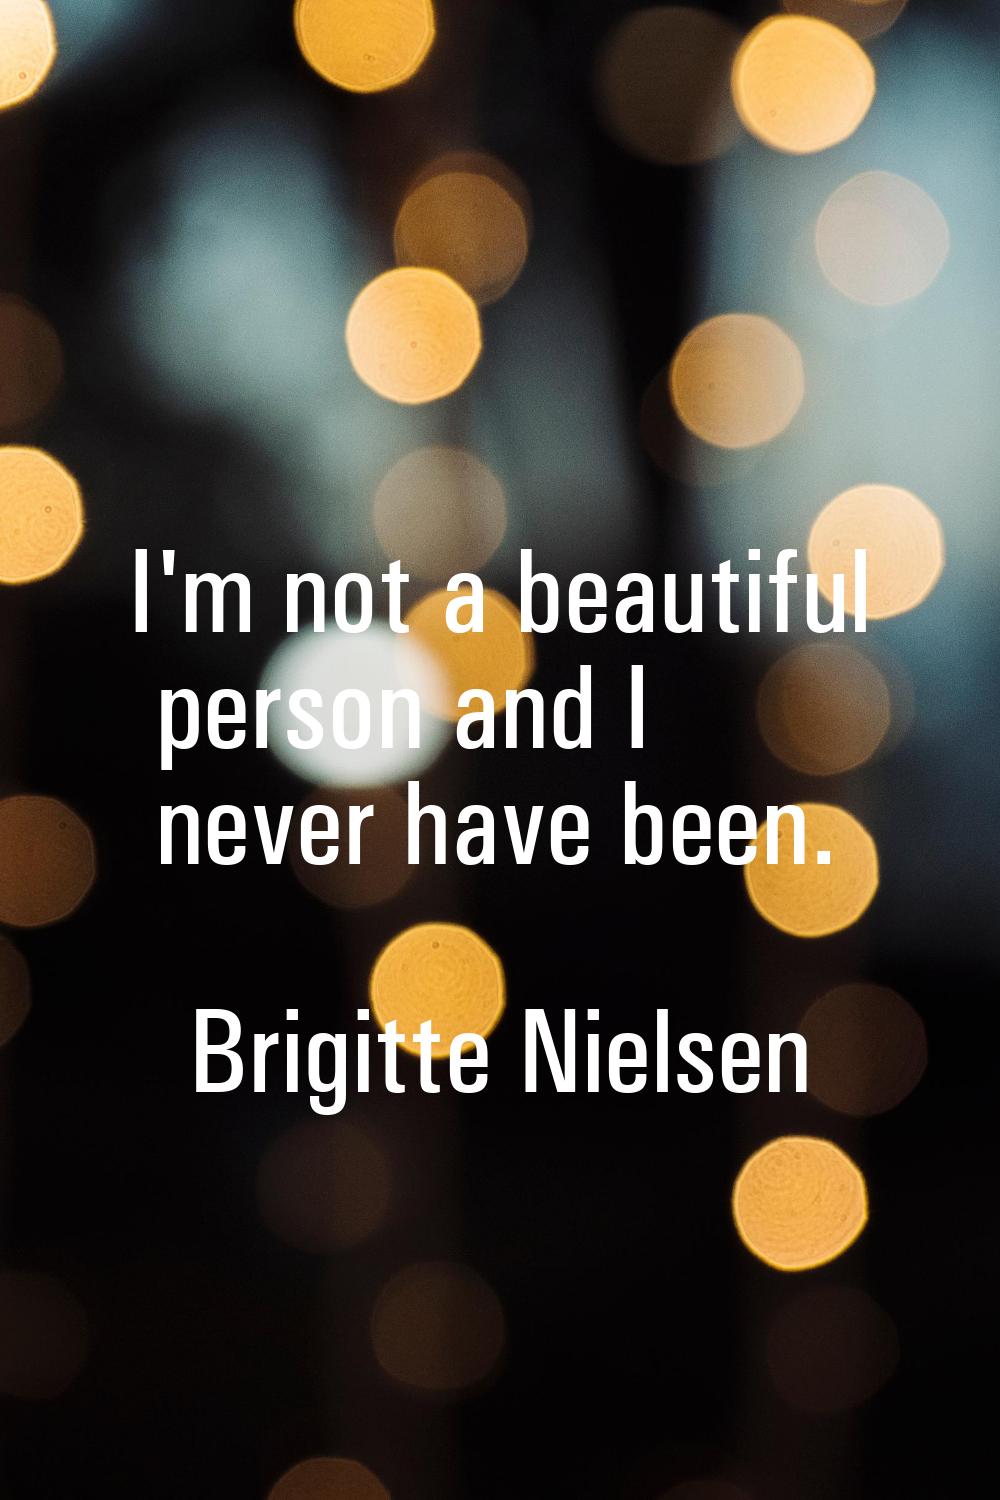 I'm not a beautiful person and I never have been.